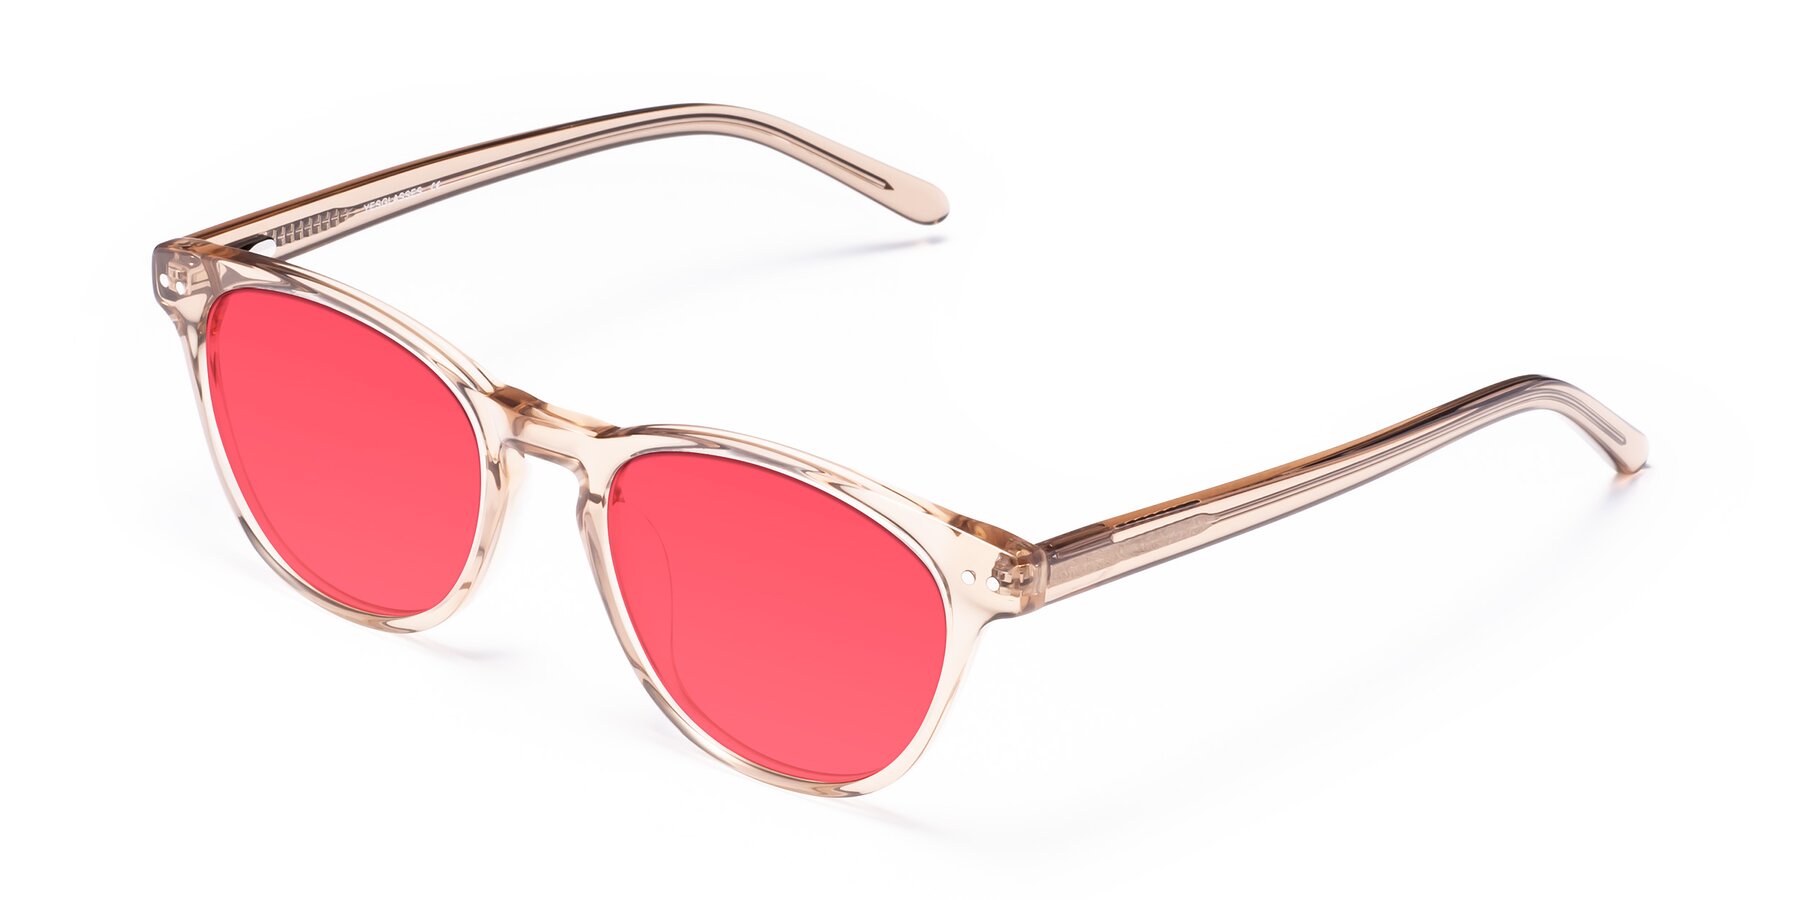 Angle of Blaze in light Brown with Pink Tinted Lenses